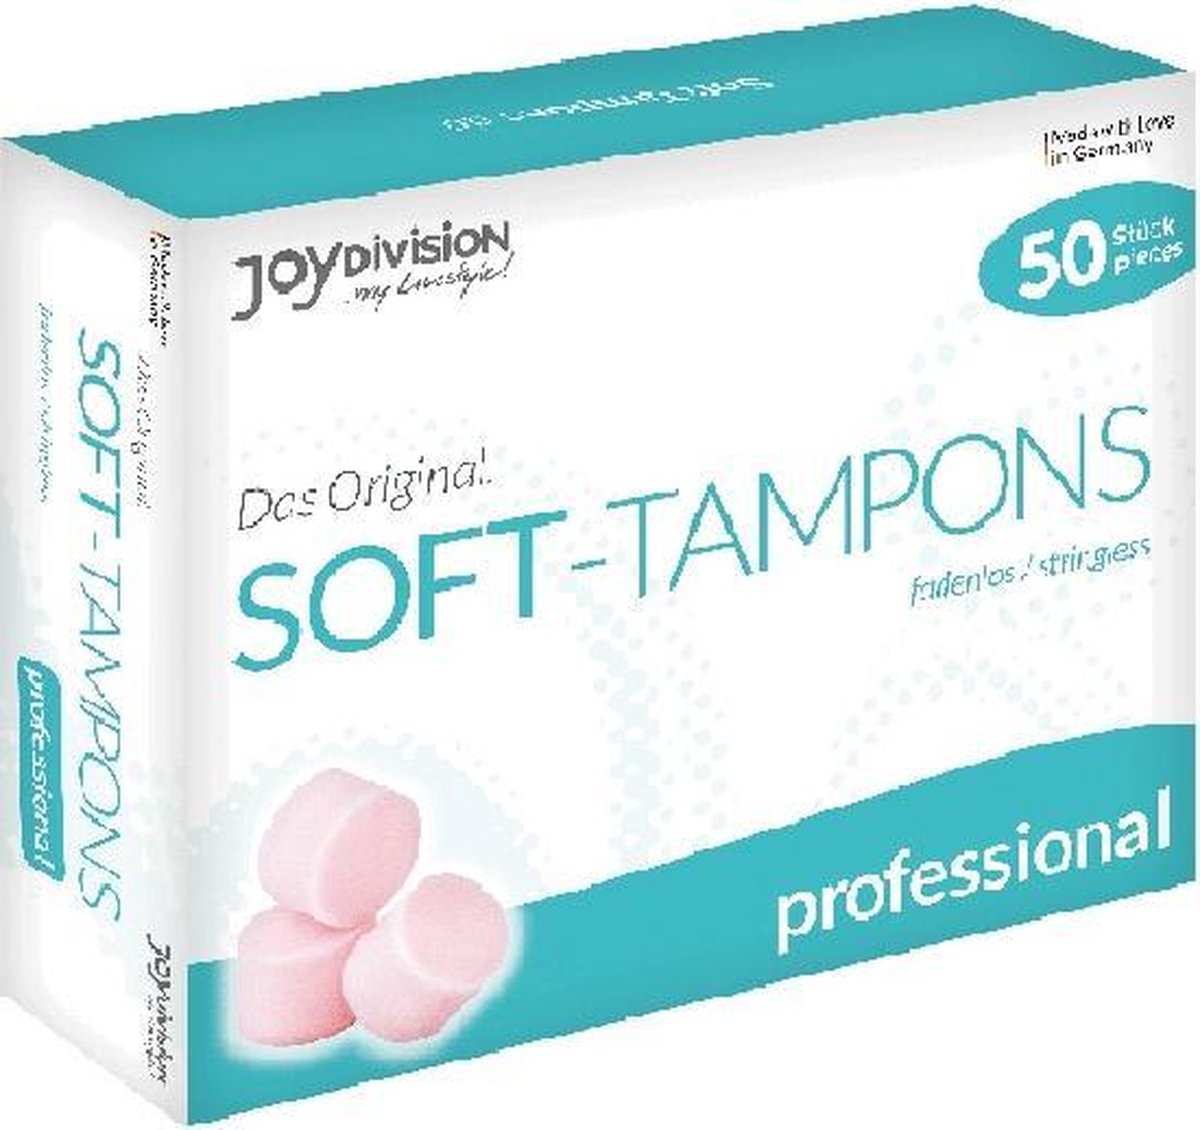 Ich bekomme die wo tampons soft Periodenprodukte